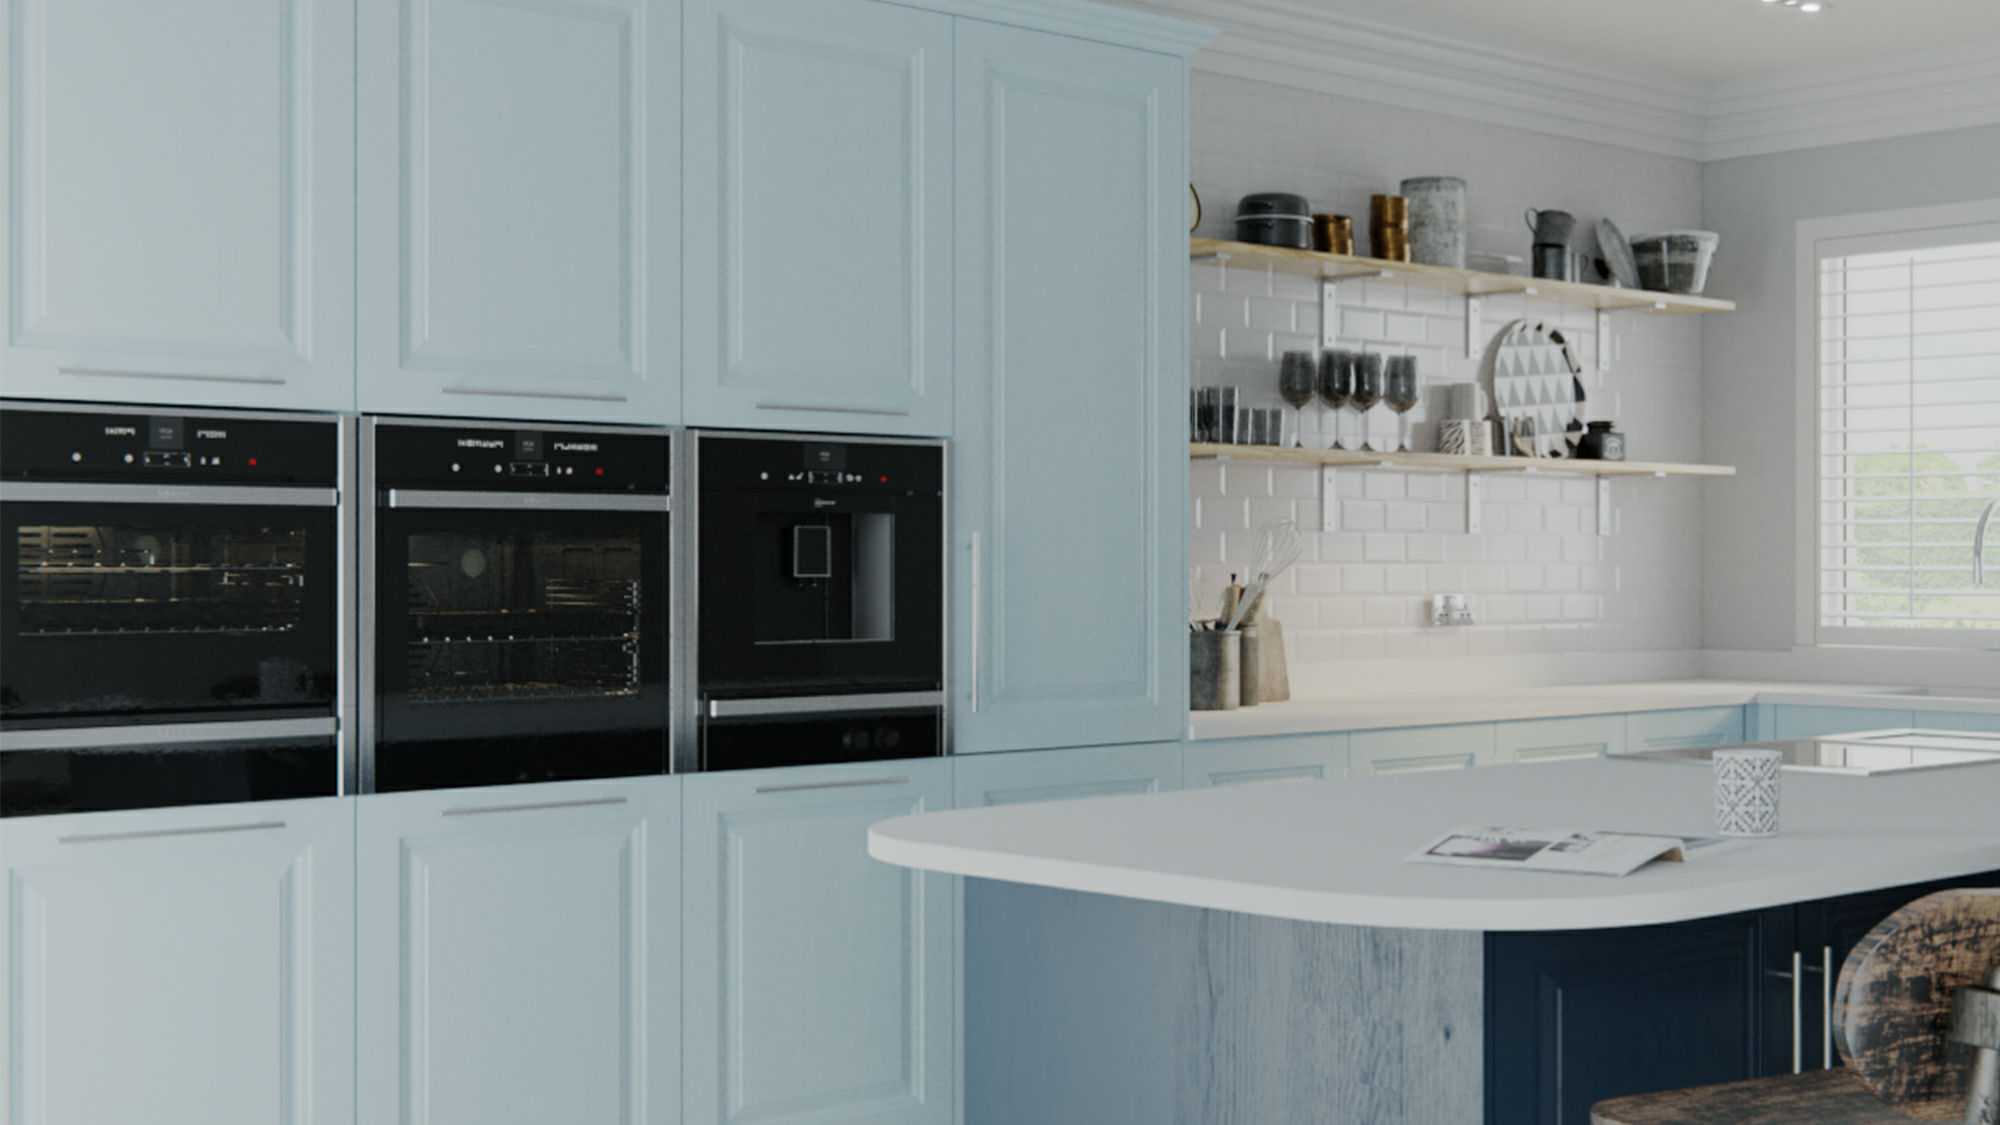 Jefferson solid wood Pantry Blue kitchens blending traditional elegance with the classic beauty of pantry blue